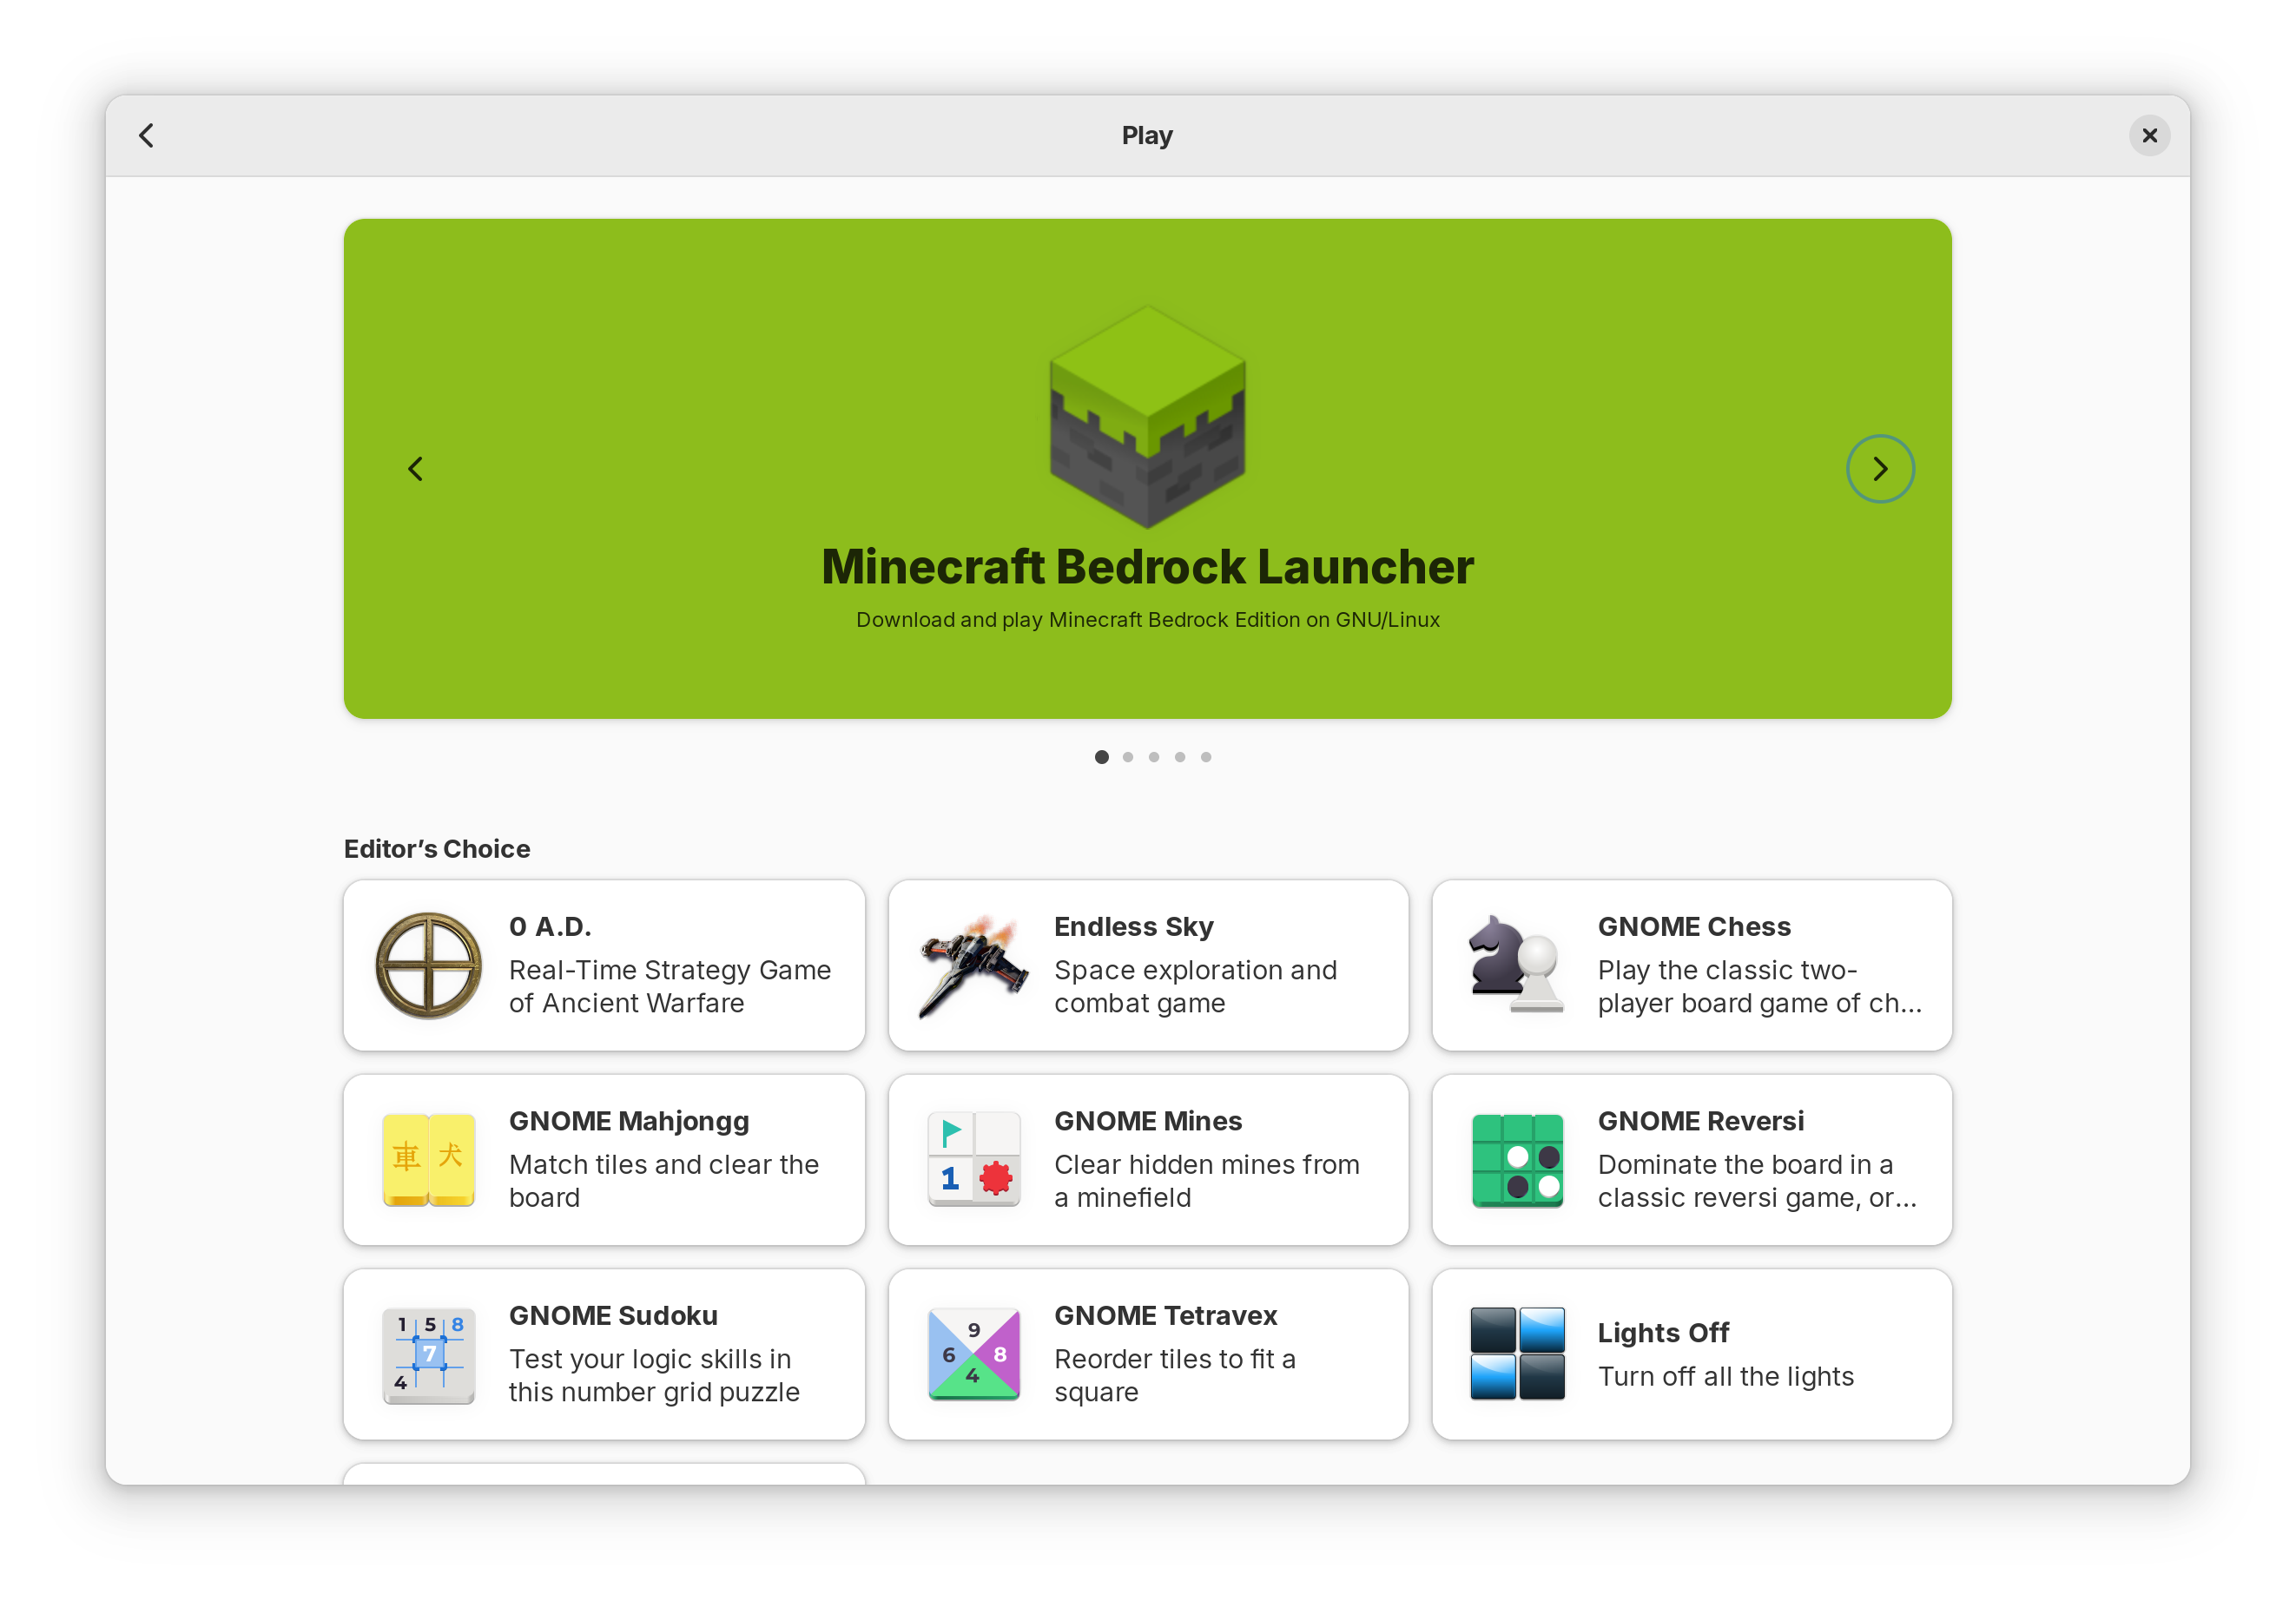 App Center's Play category, with games like Minecraft and Mahjongg